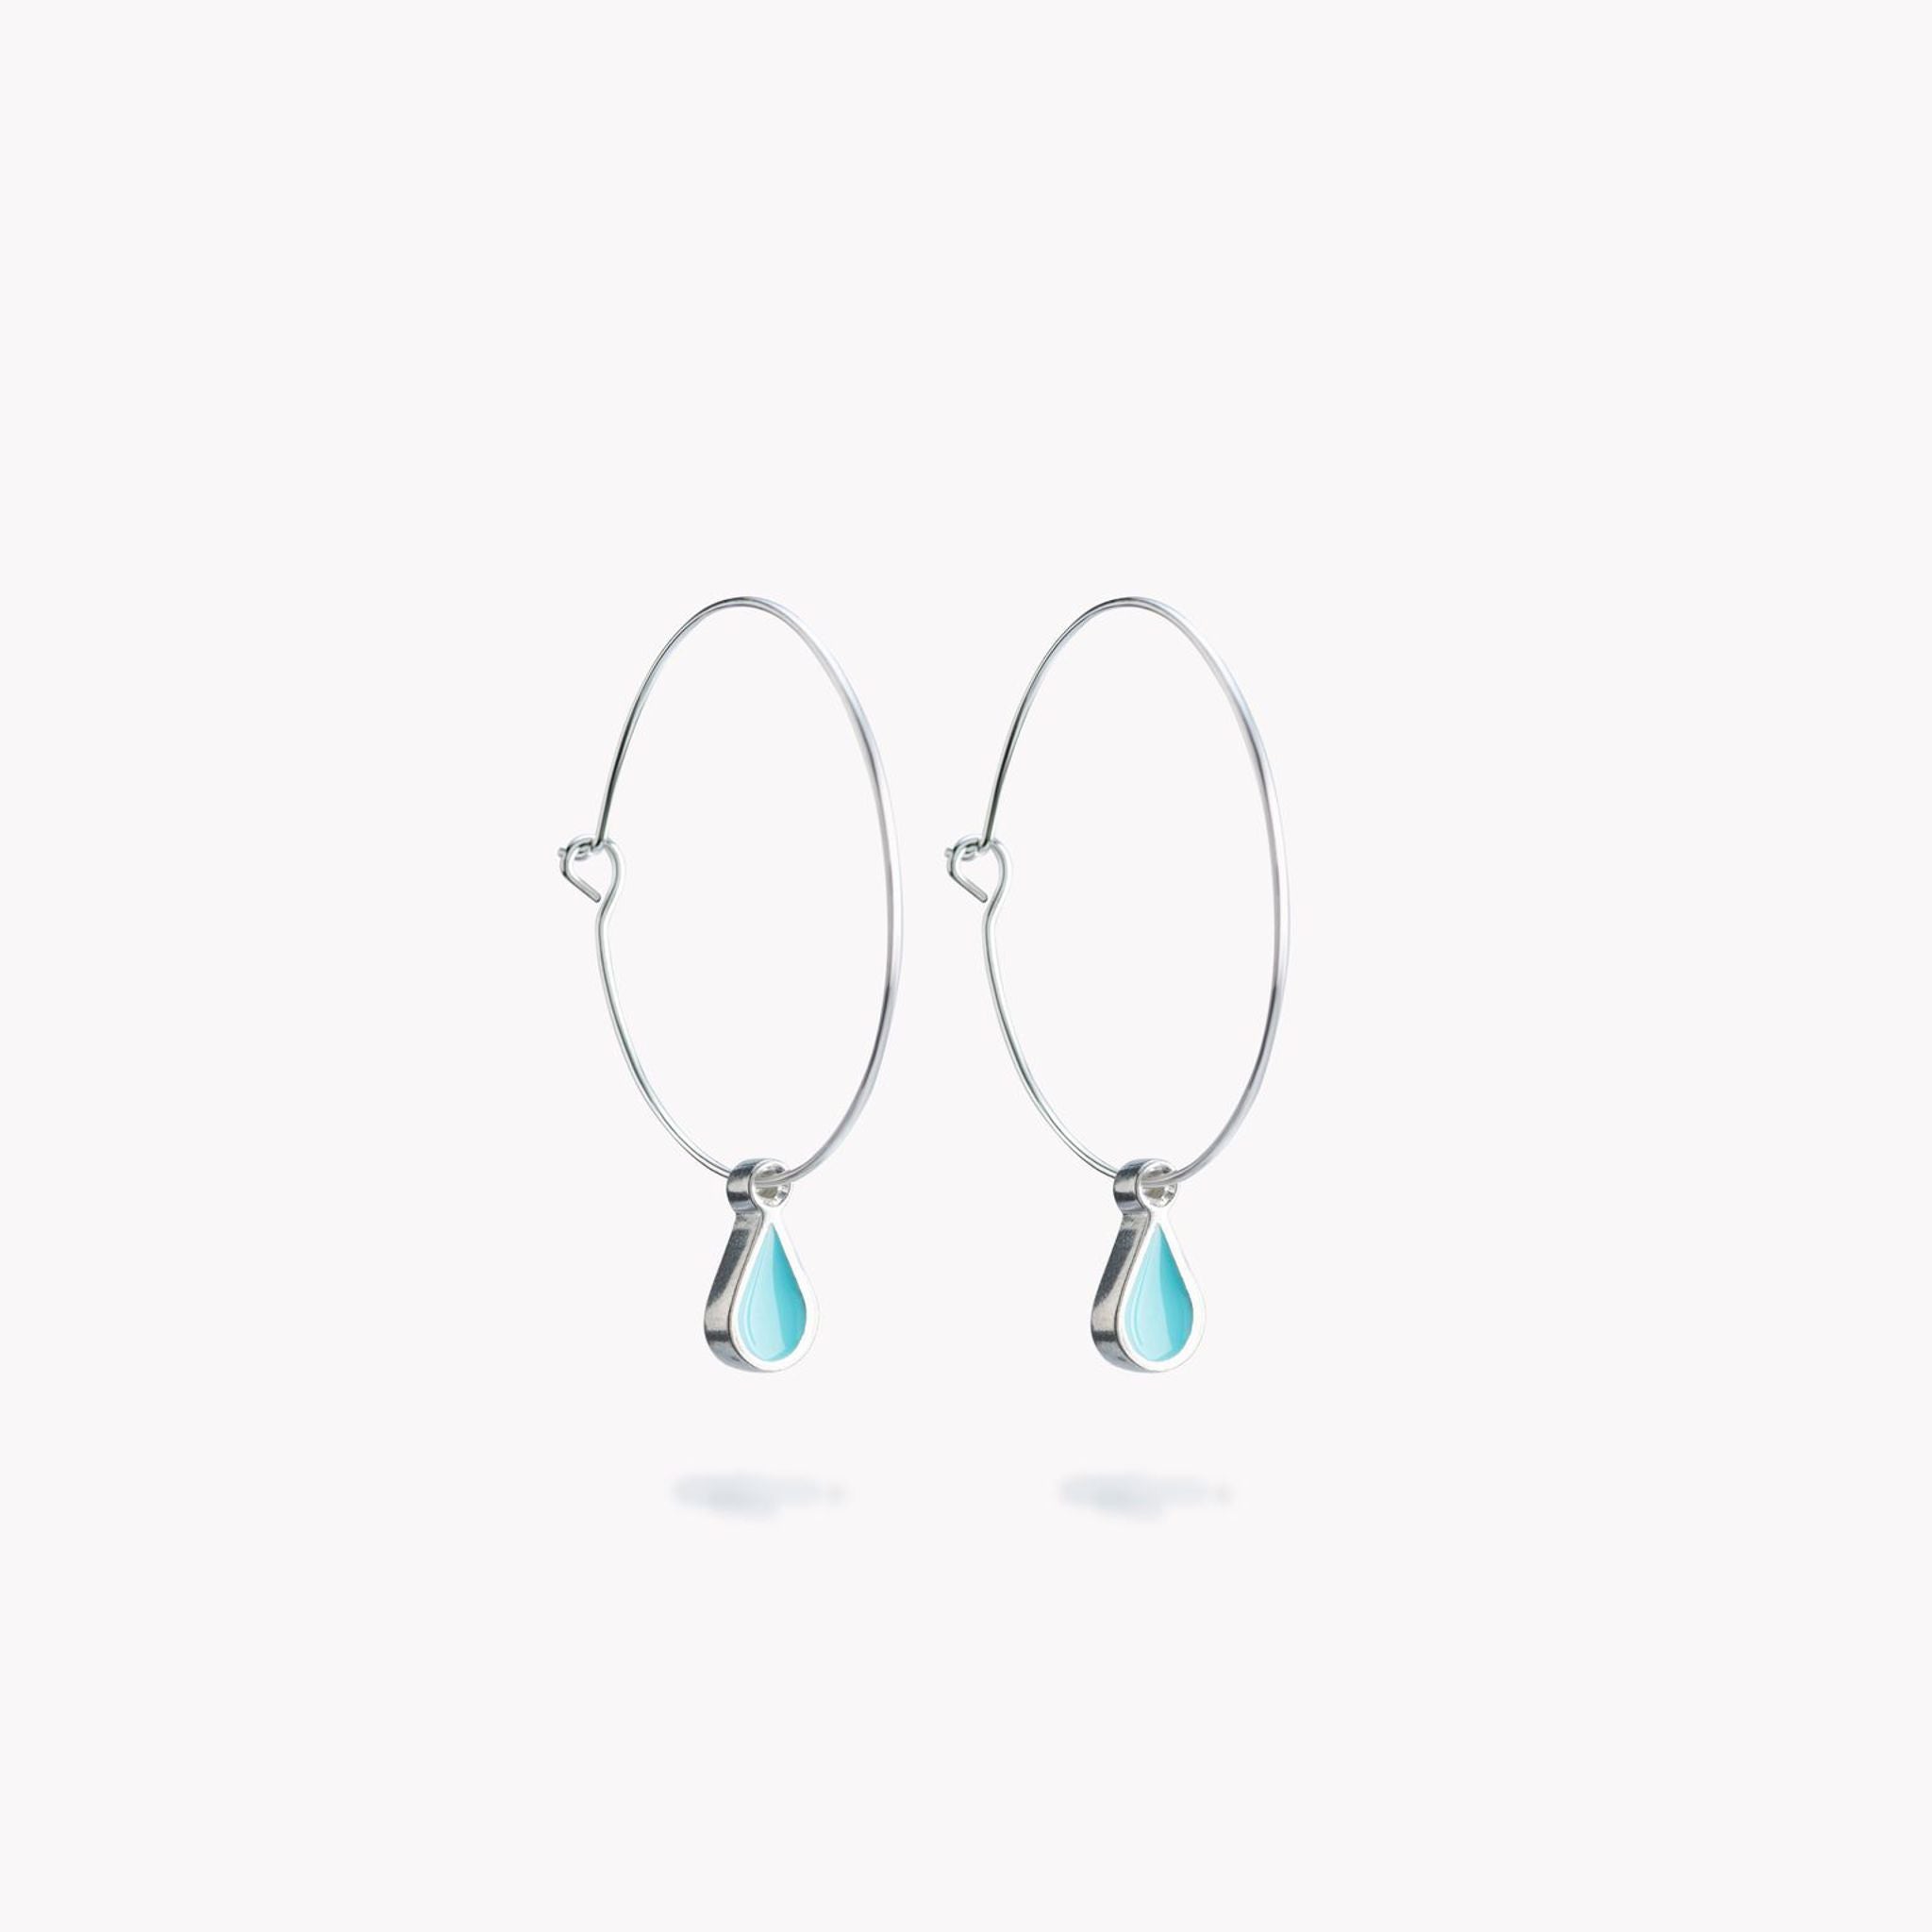 A simple pair of hoop earrings with turquoise hanging droplets.